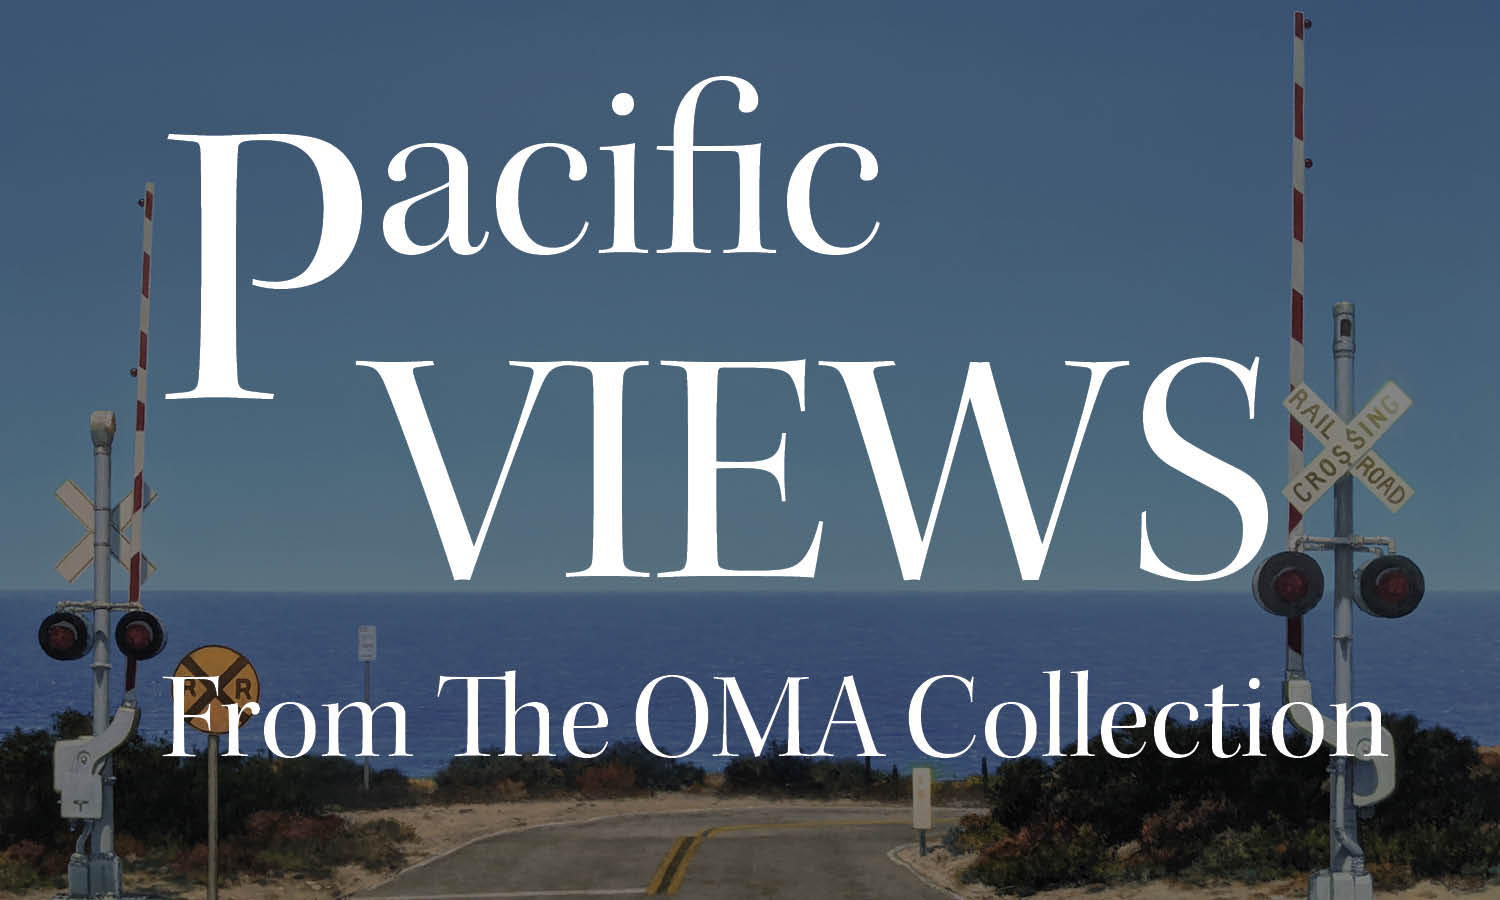 Pacific Views from the OMA Collection